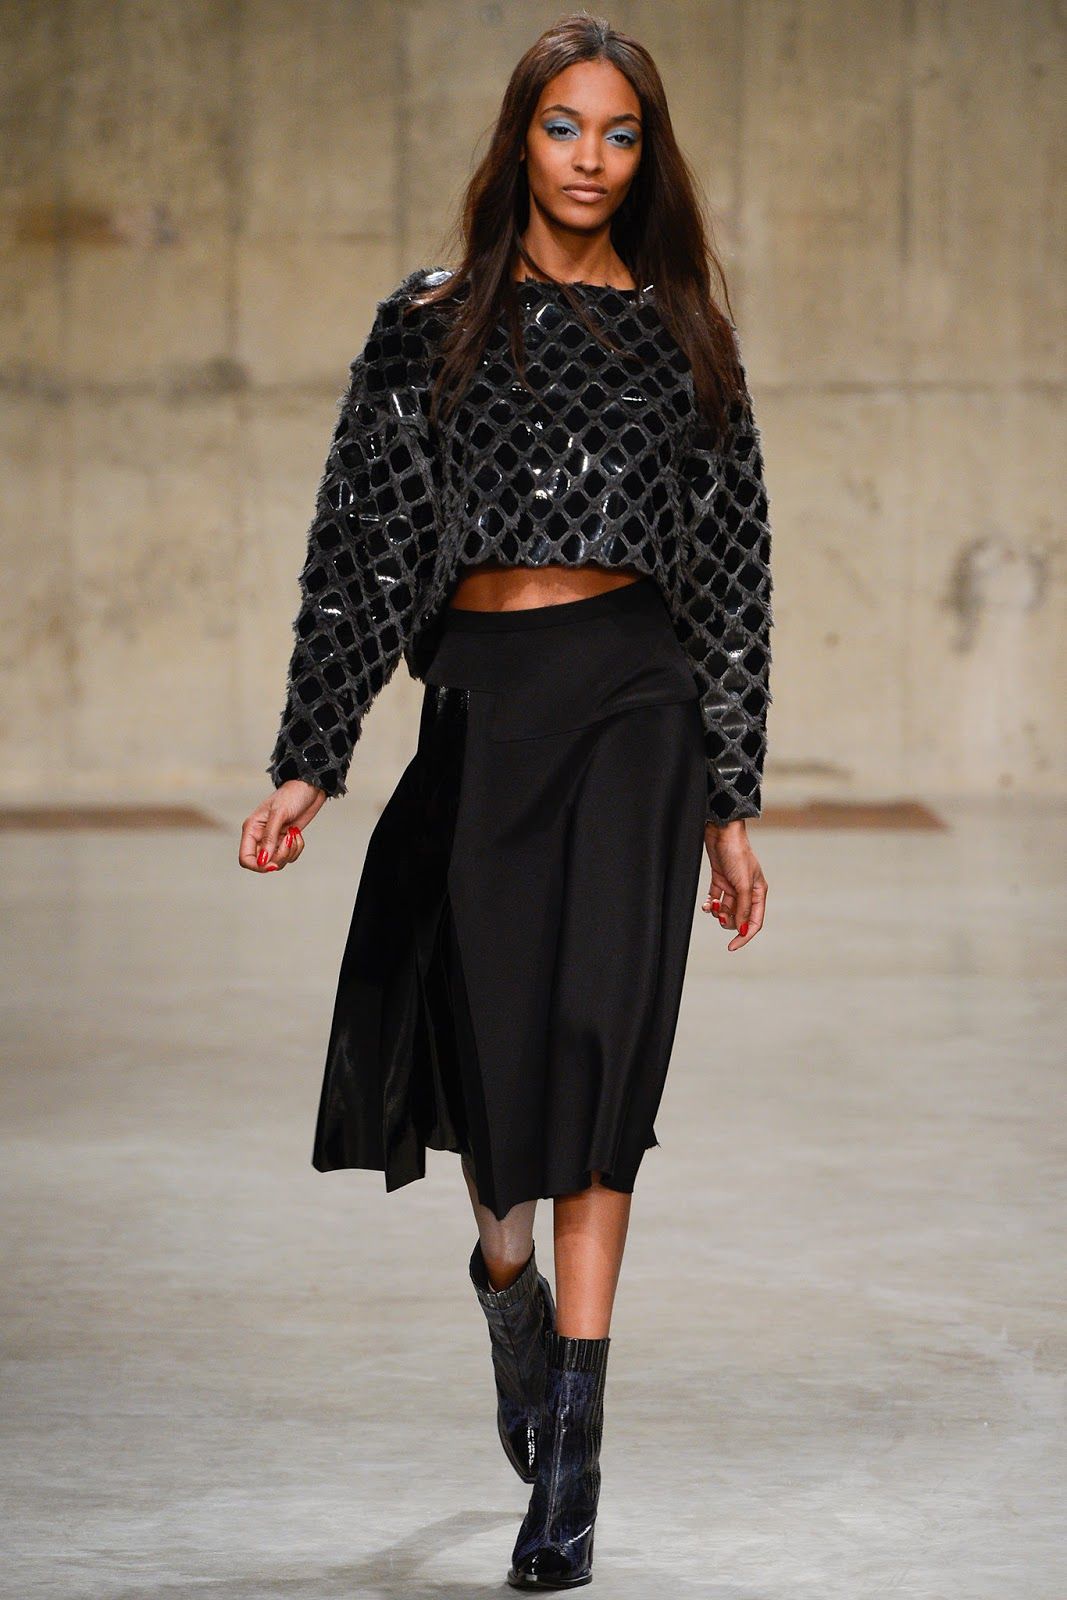 Topshop Unique Fall/Winter 2013 collection – London Fashion Week | Fab ...